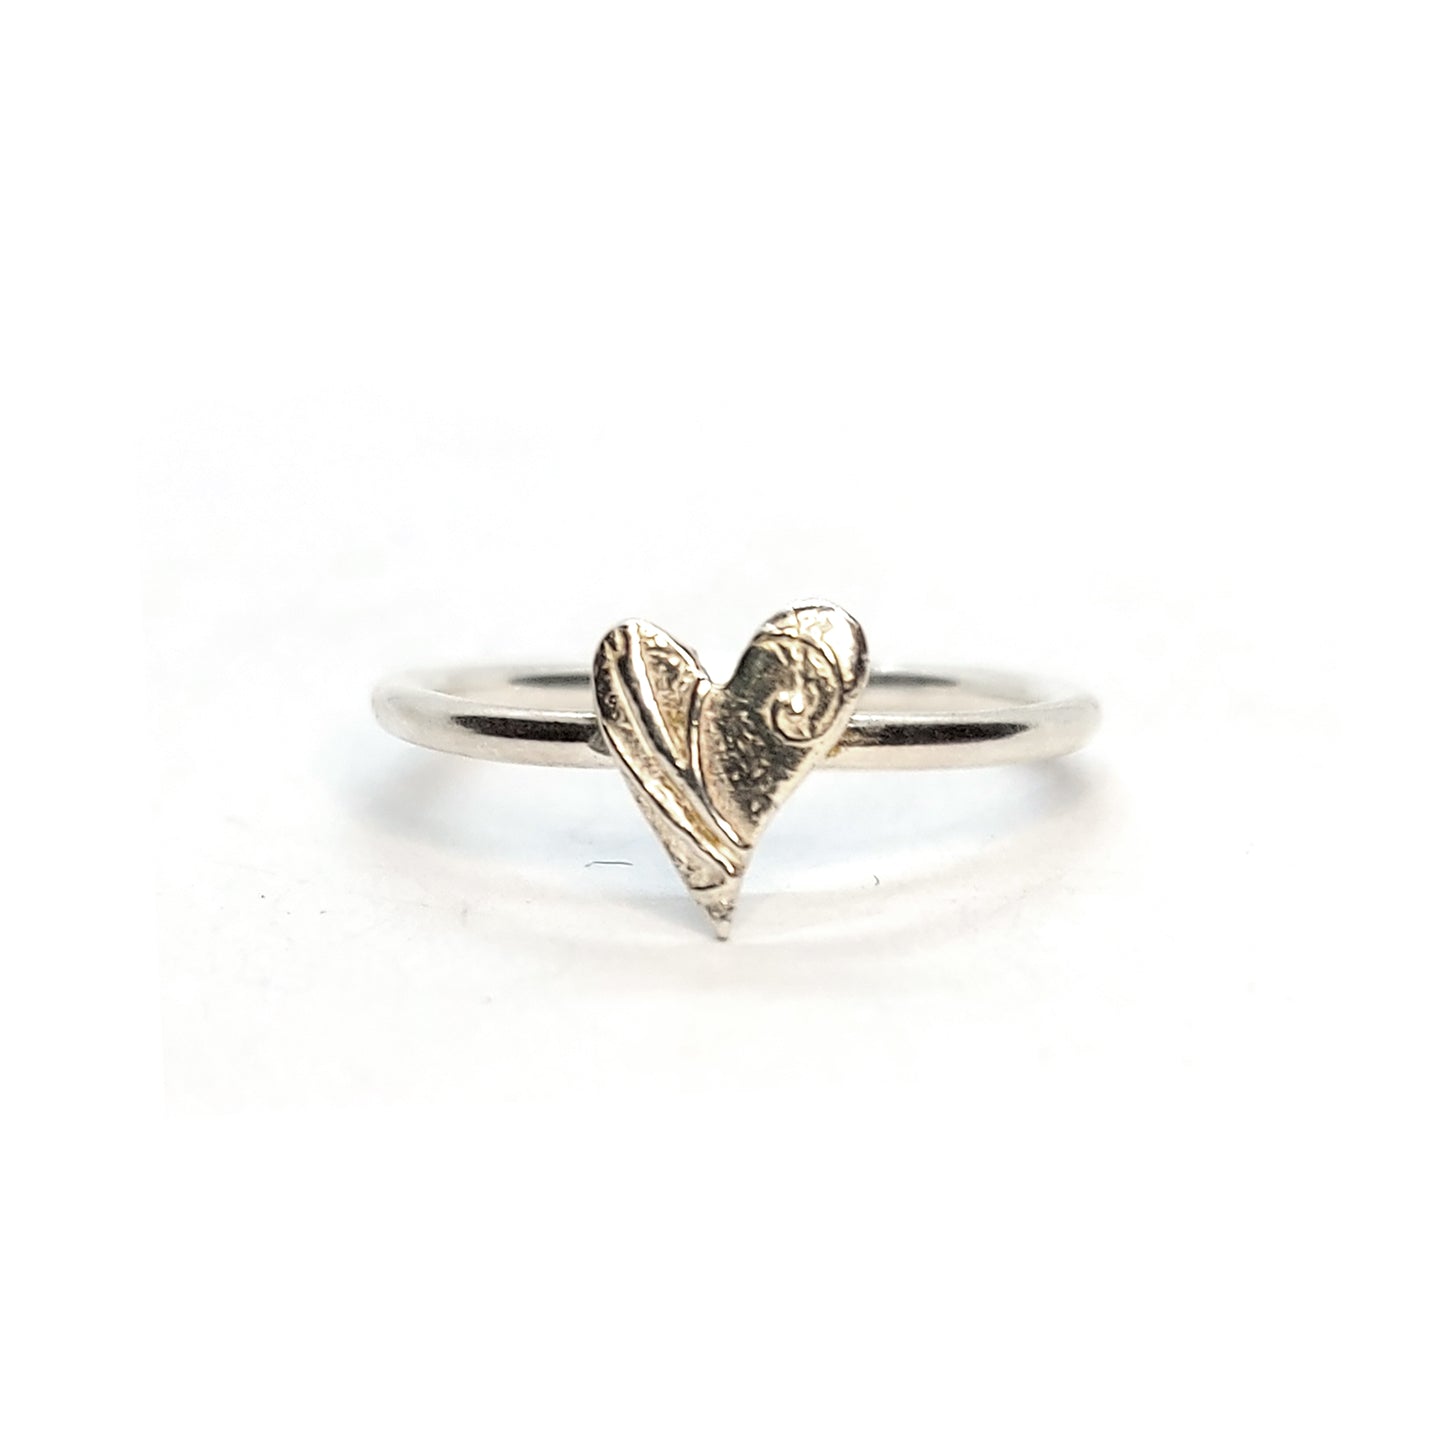 A silver stacking ring with an asymmetric patterned heart in the centre.